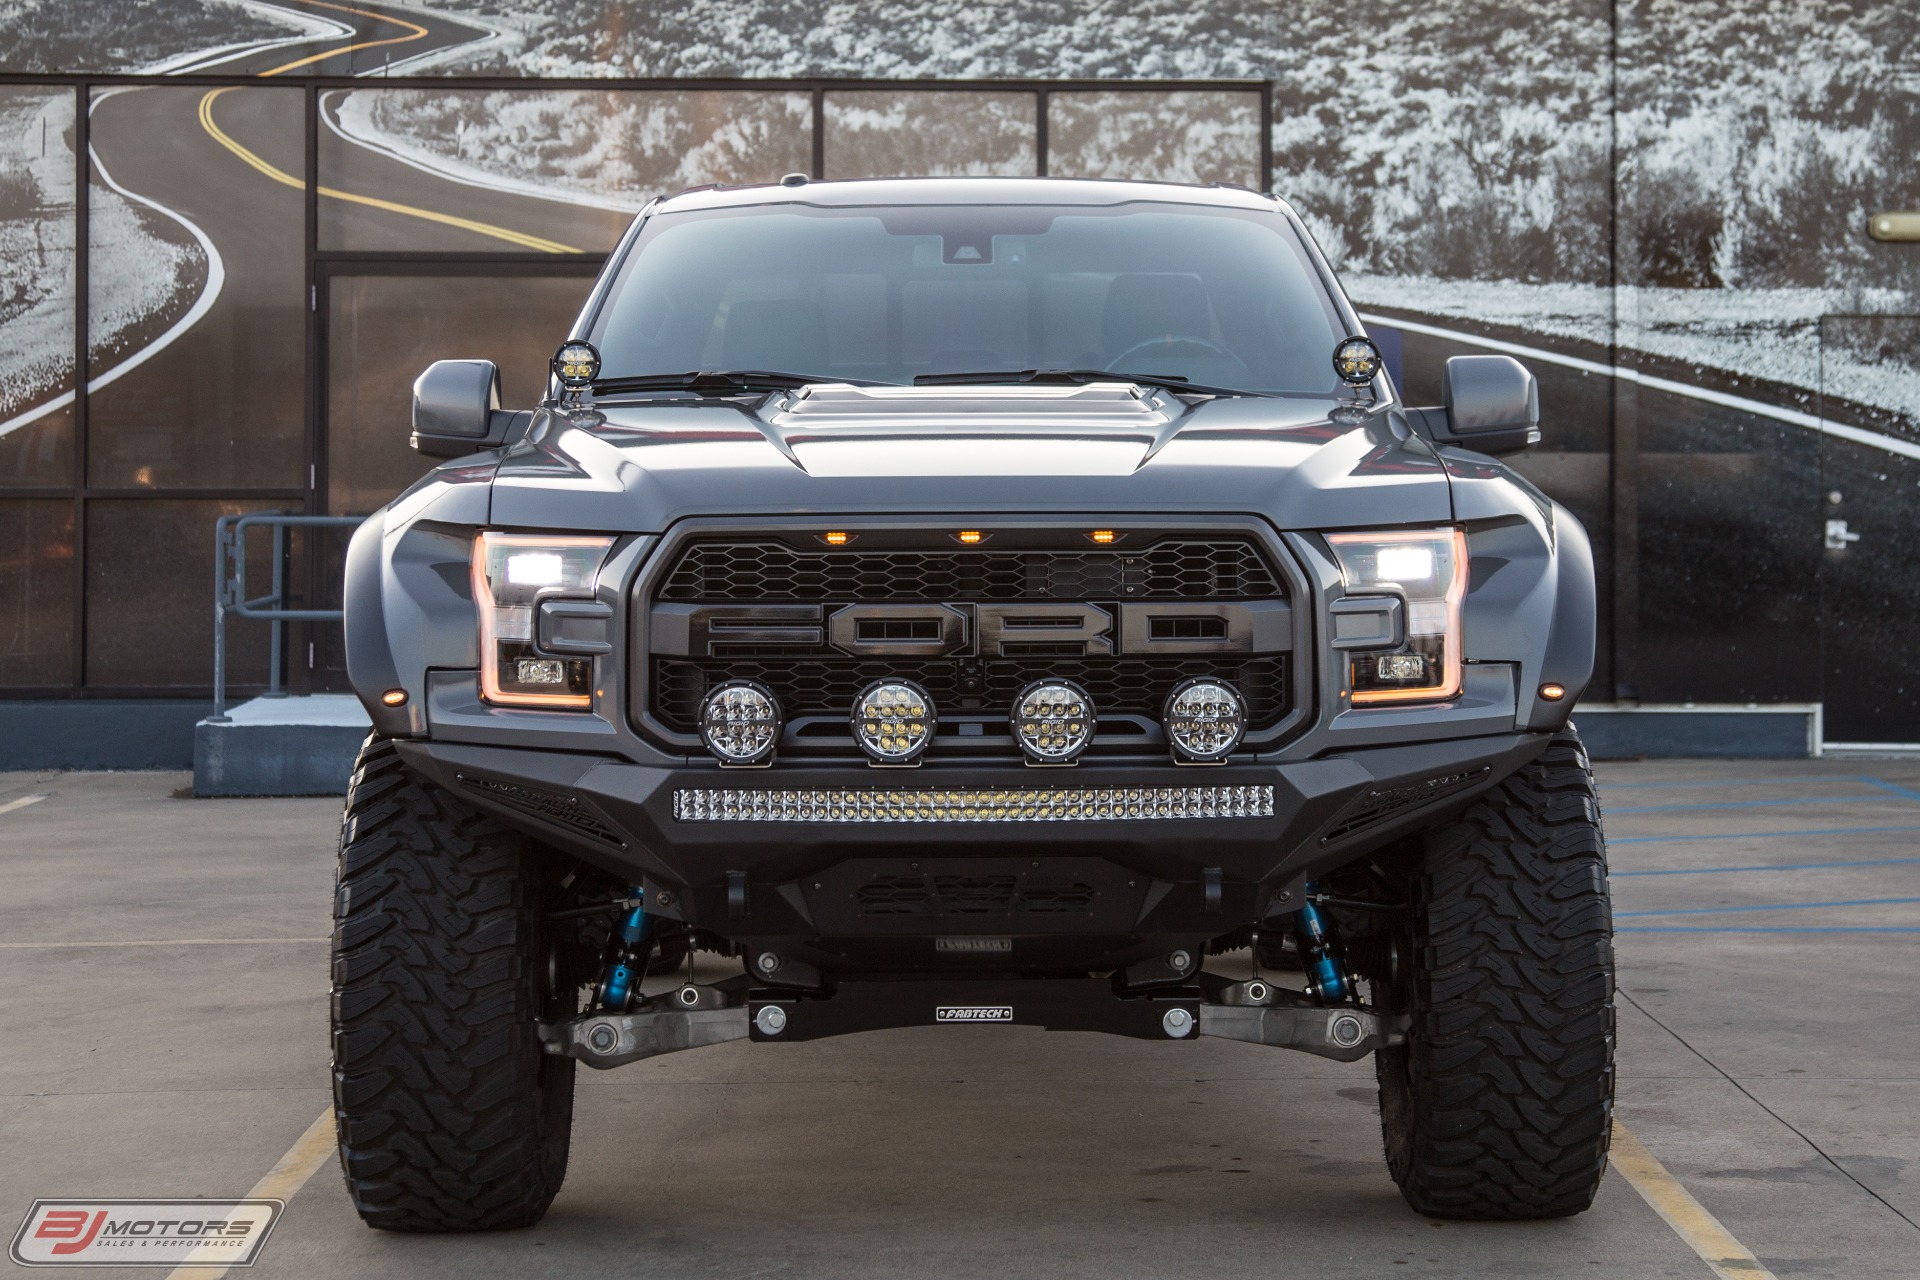 Used 2017 Ford F 150 Raptor Signature Series For Sale